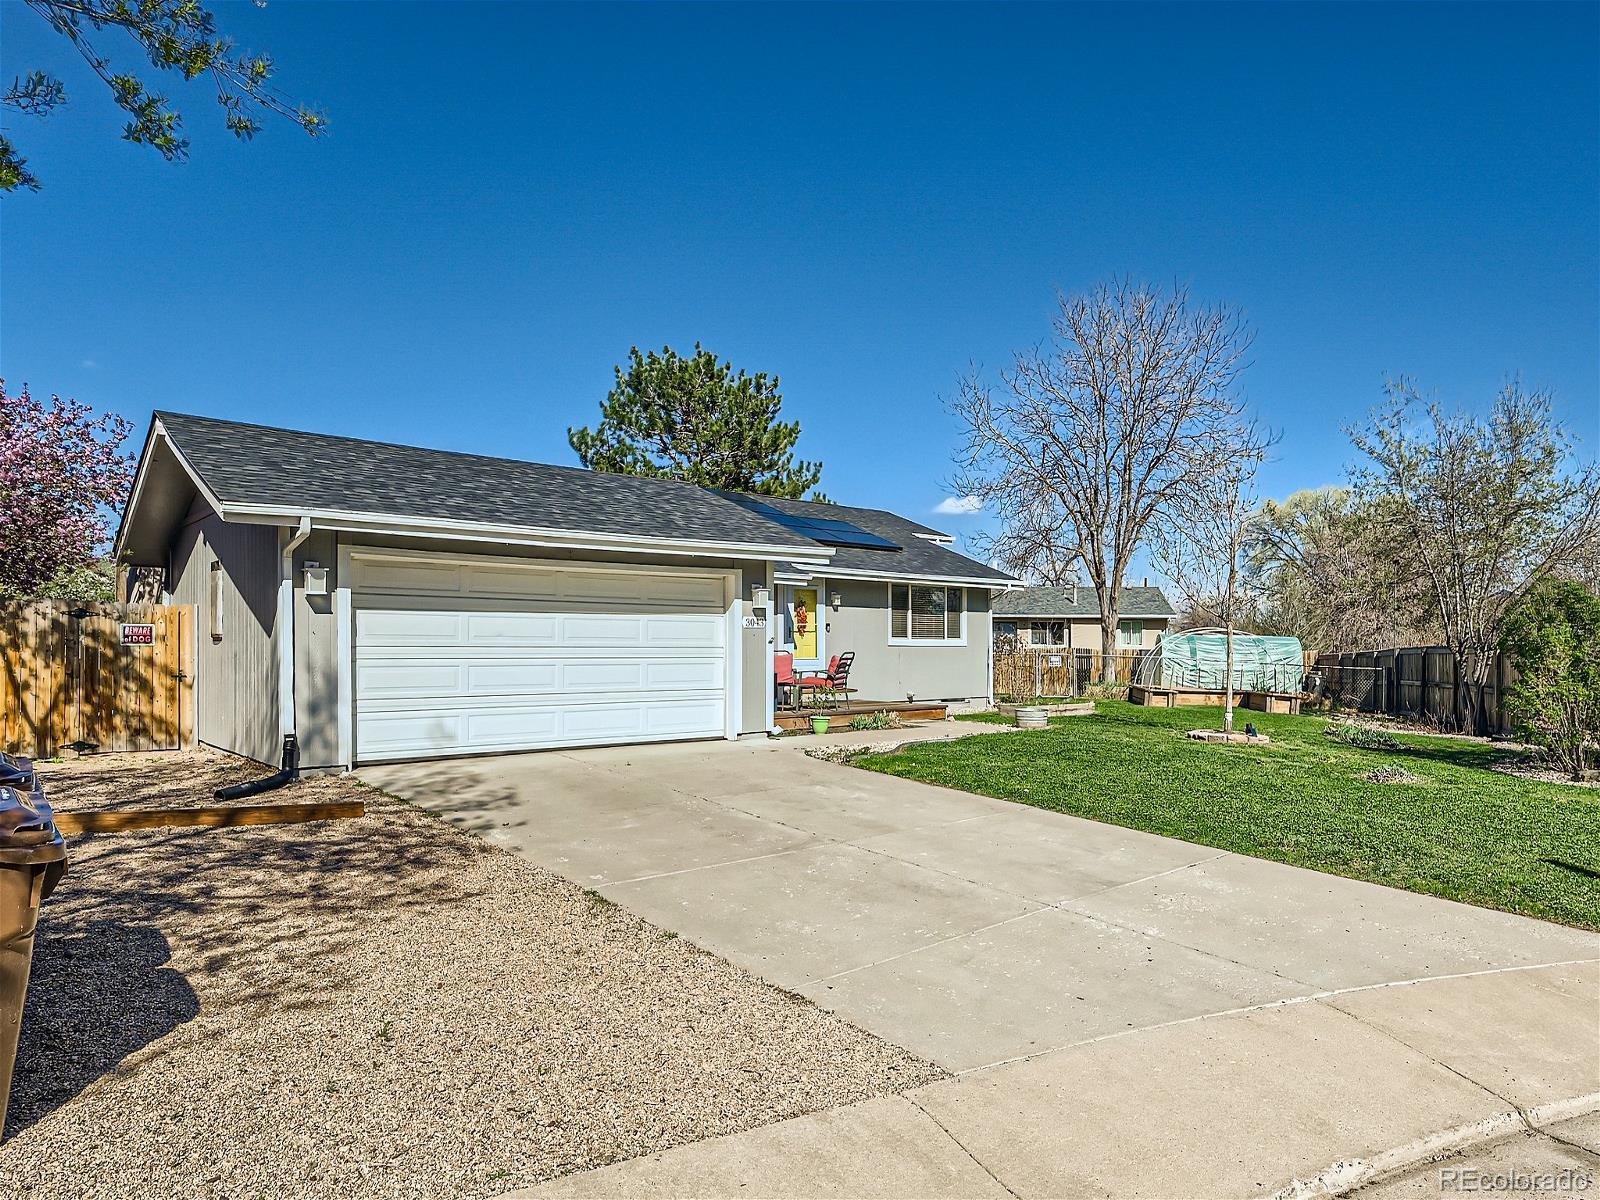 3043 w 134th circle, Broomfield sold home. Closed on 2024-05-16 for $550,000.